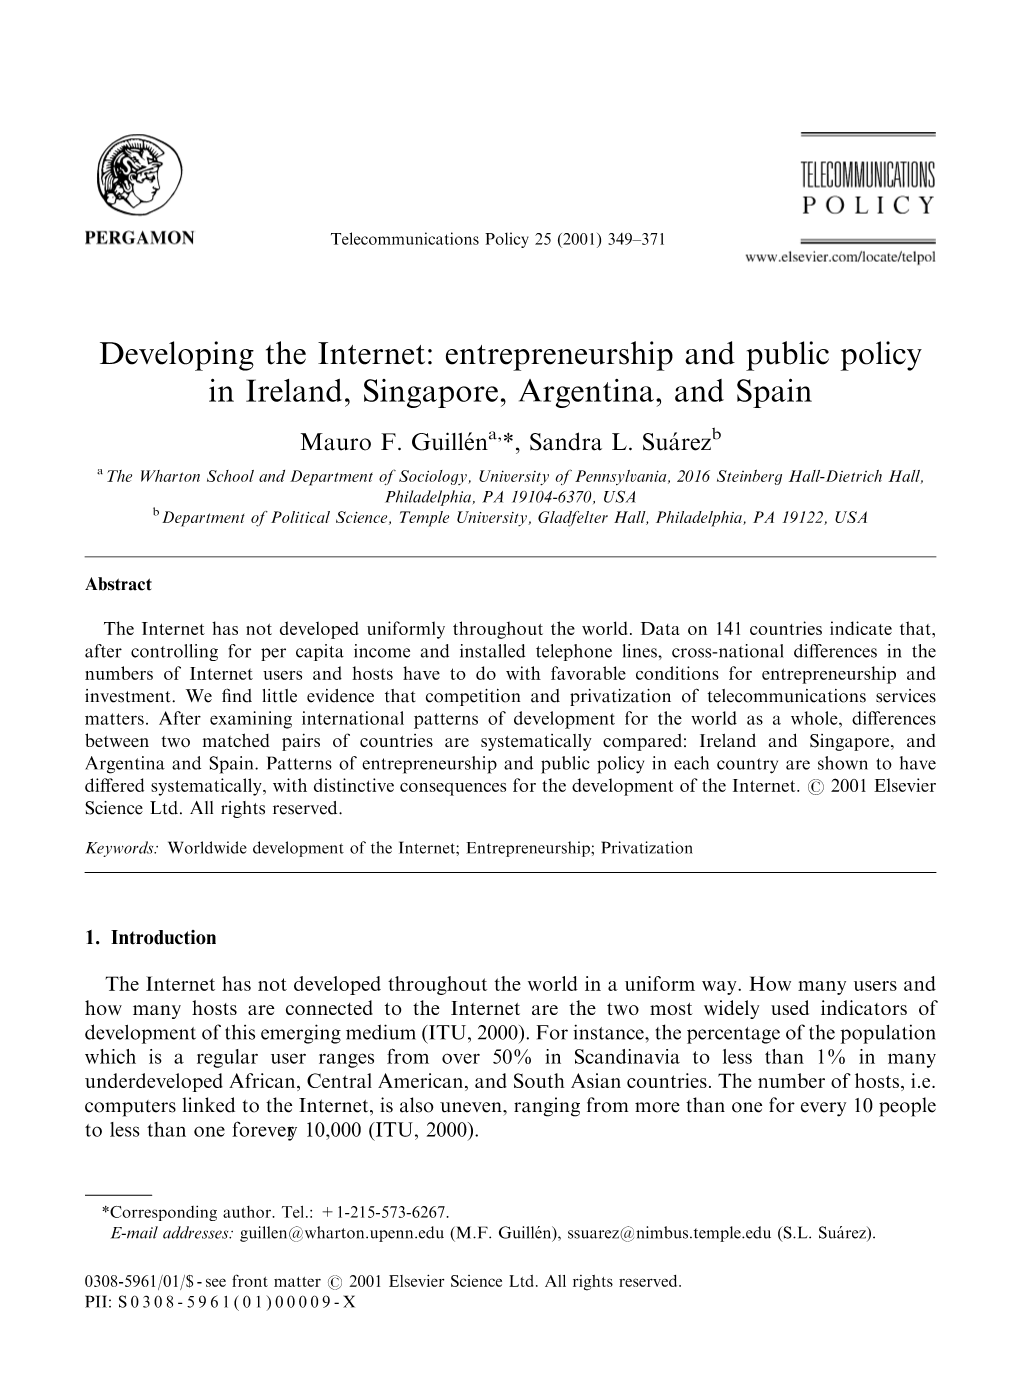 Developing the Internet: Entrepreneurship and Public Policy in Ireland, Singapore, Argentina, and Spain Mauro F